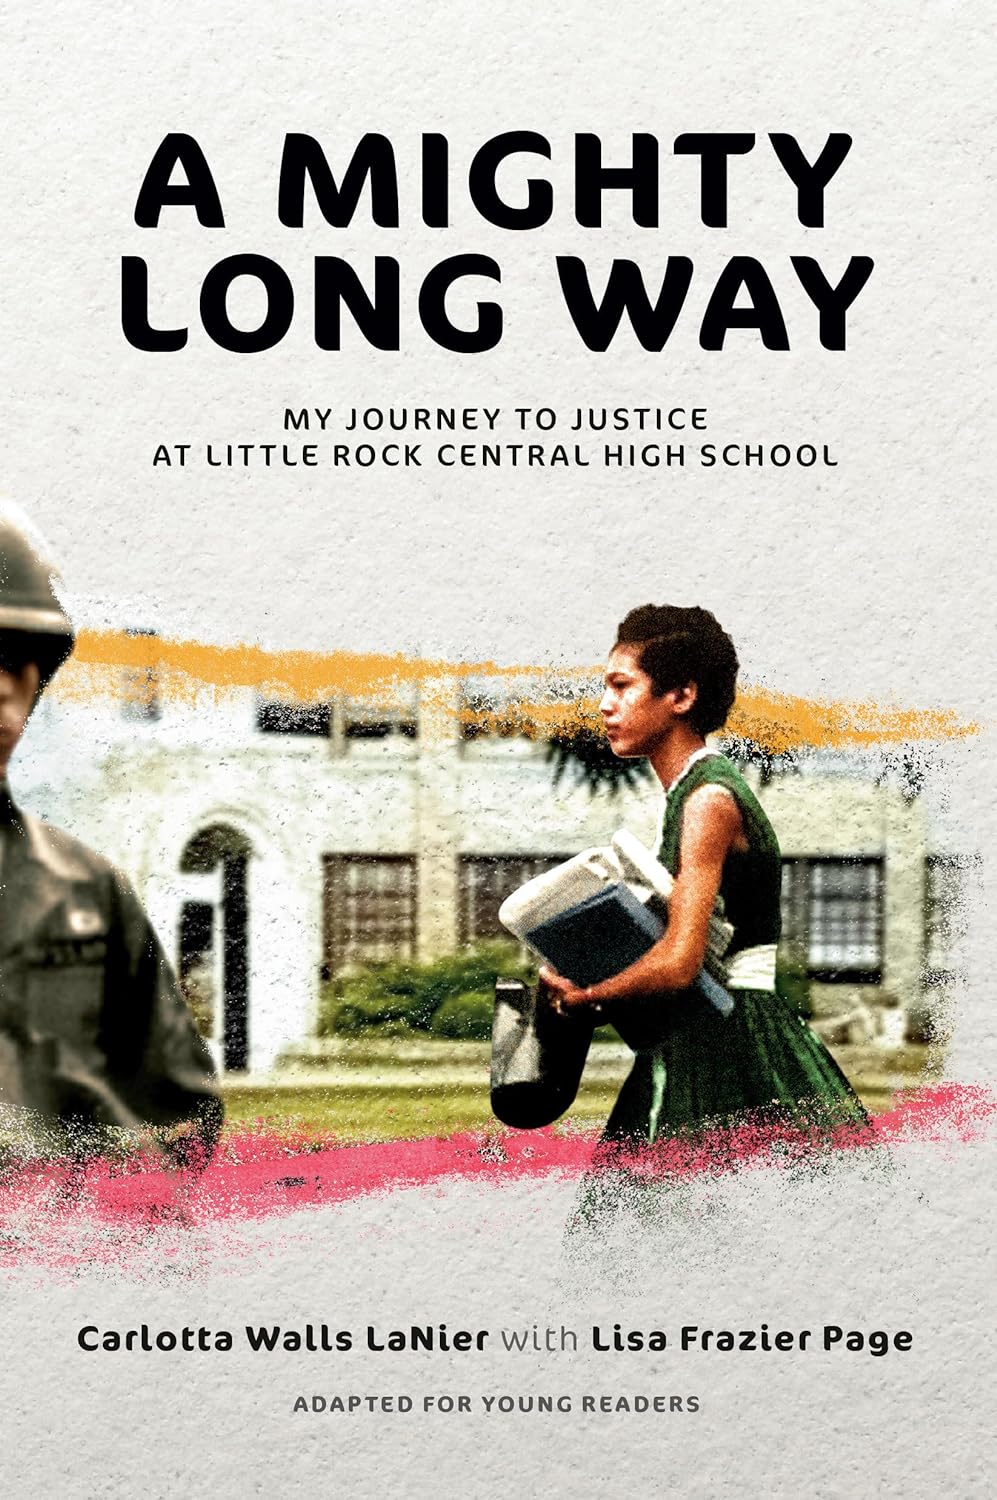 A Mighty Long Way (Adapted for Young Readers): My Journey to Justice at Little Rock Central High School - Paperback